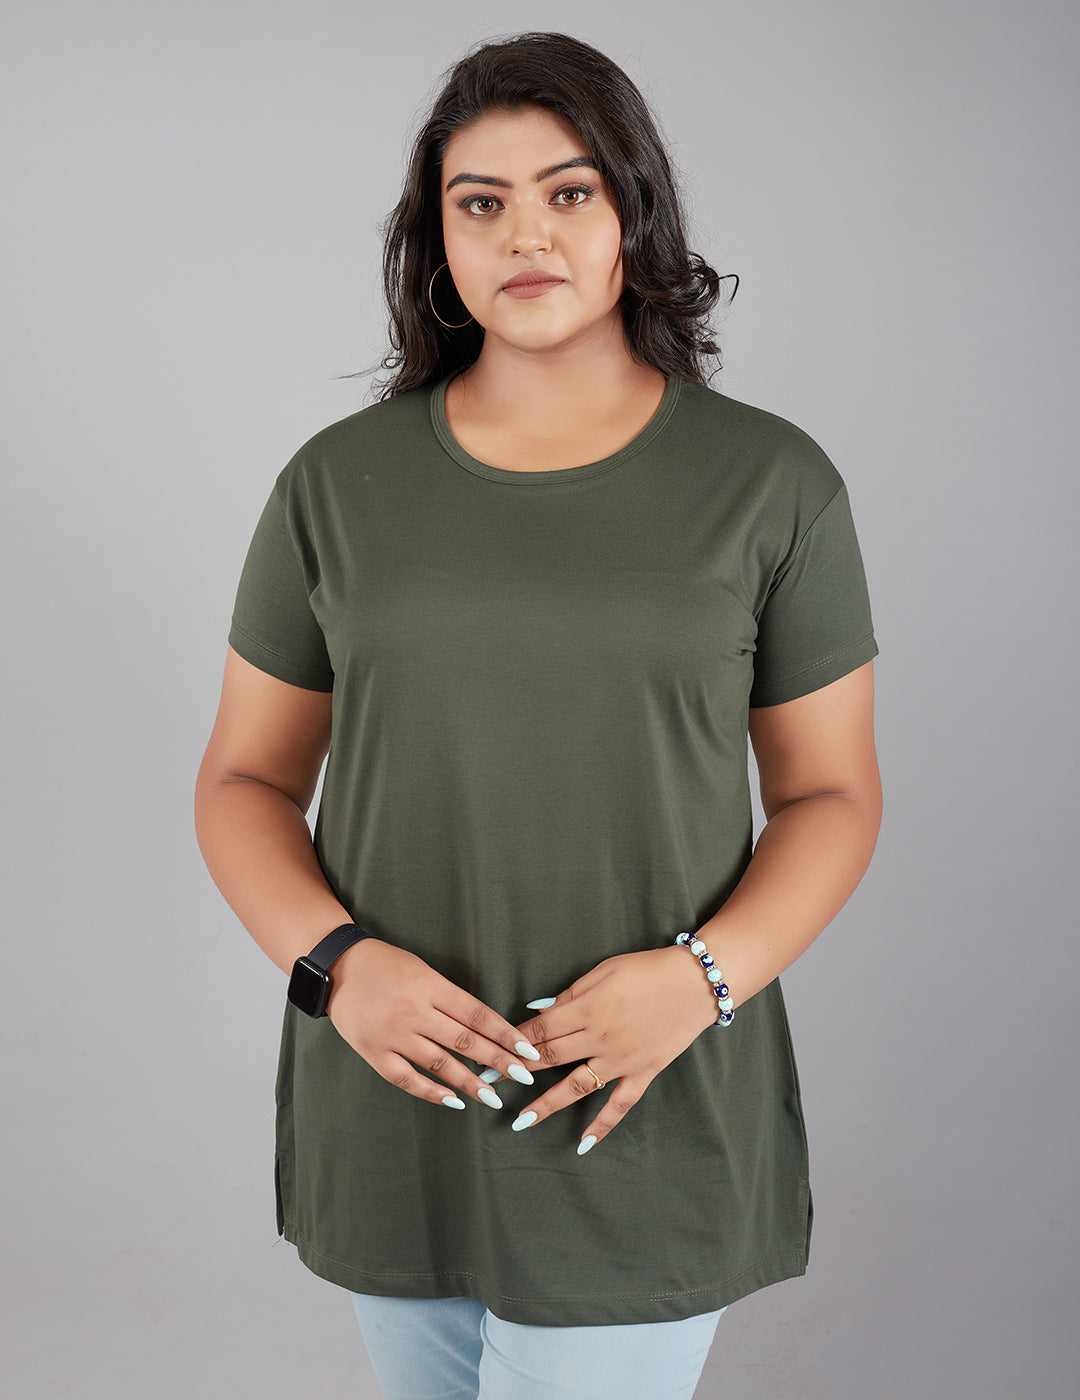 Plus Size Plain Cotton T-Shirts For Women Pack of 2 (Black & Olive Green)